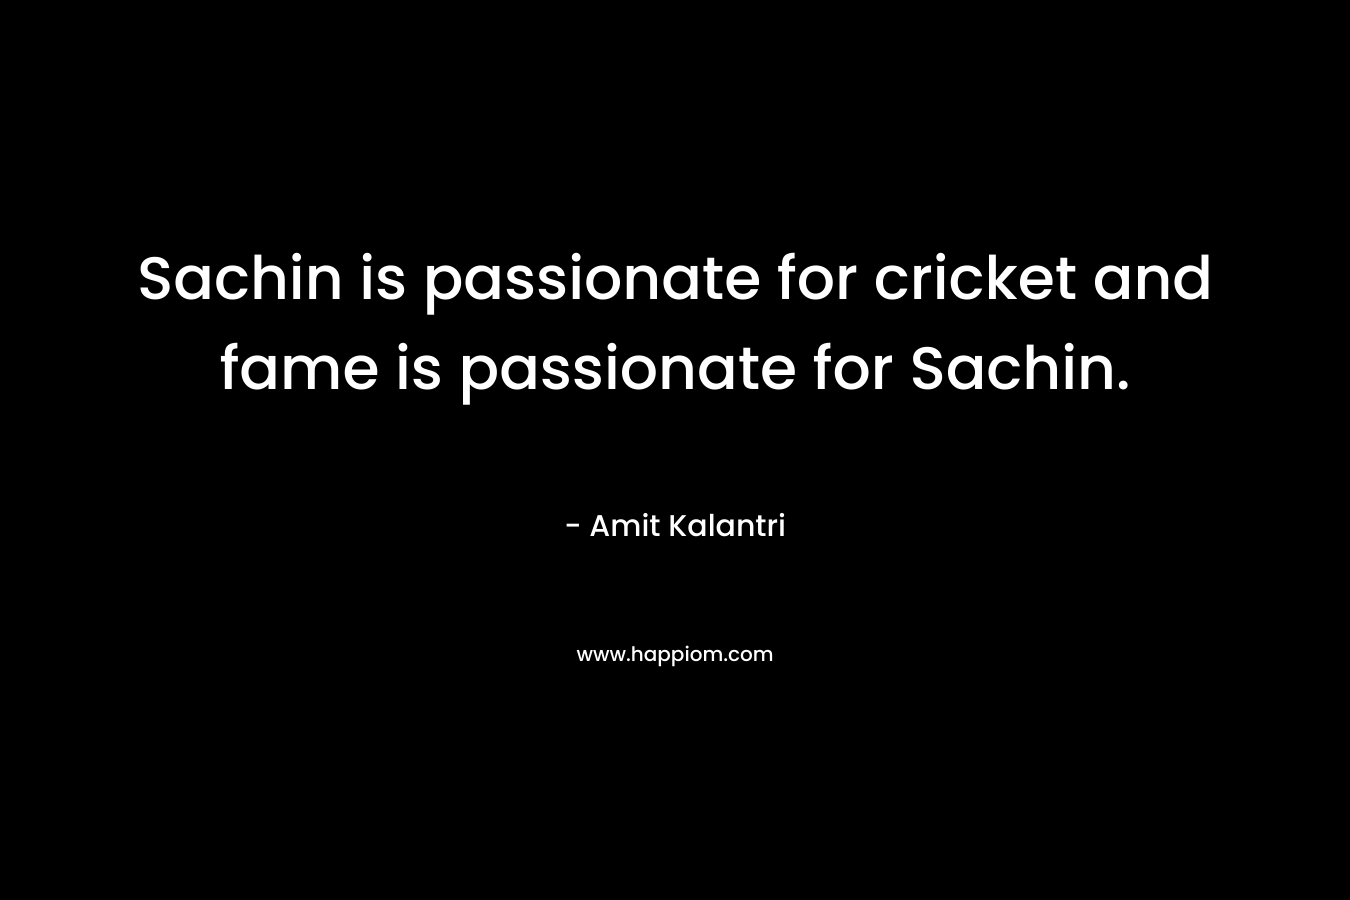 Sachin is passionate for cricket and fame is passionate for Sachin. – Amit Kalantri